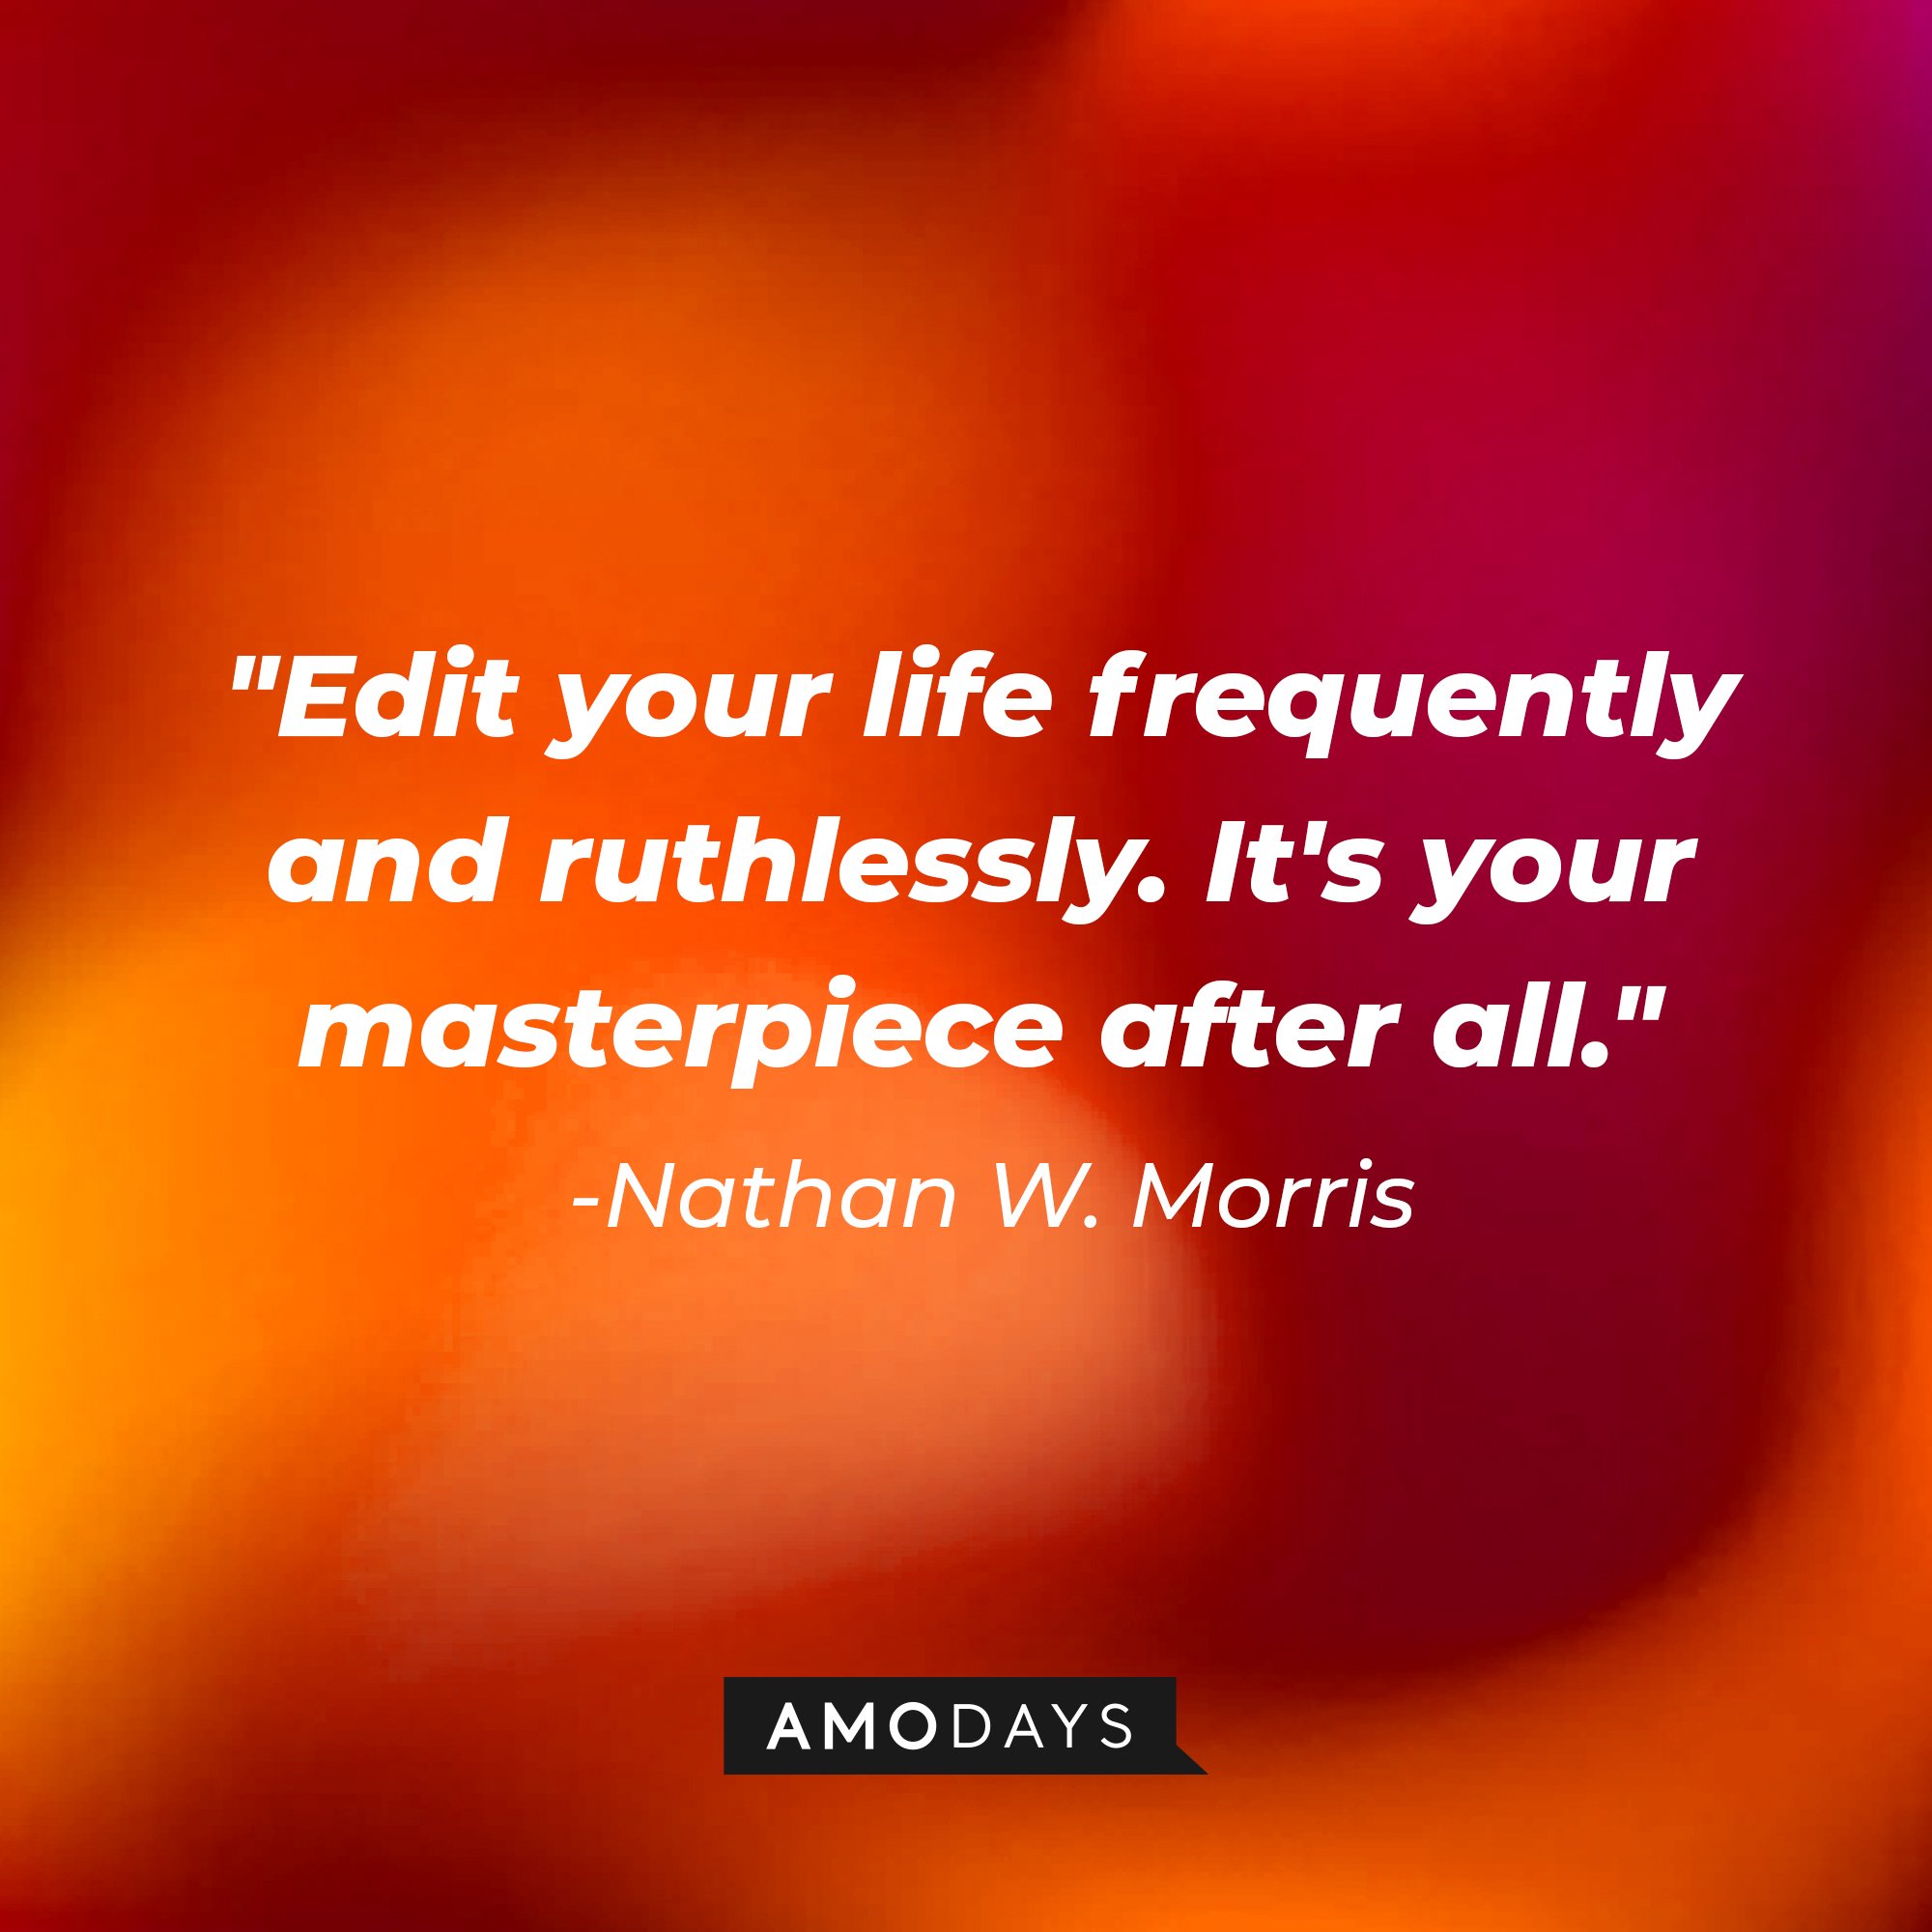 Nathan W. Morris's quote: "Edit your life frequently and ruthlessly. It's your masterpiece after all." | Image: AmoDays